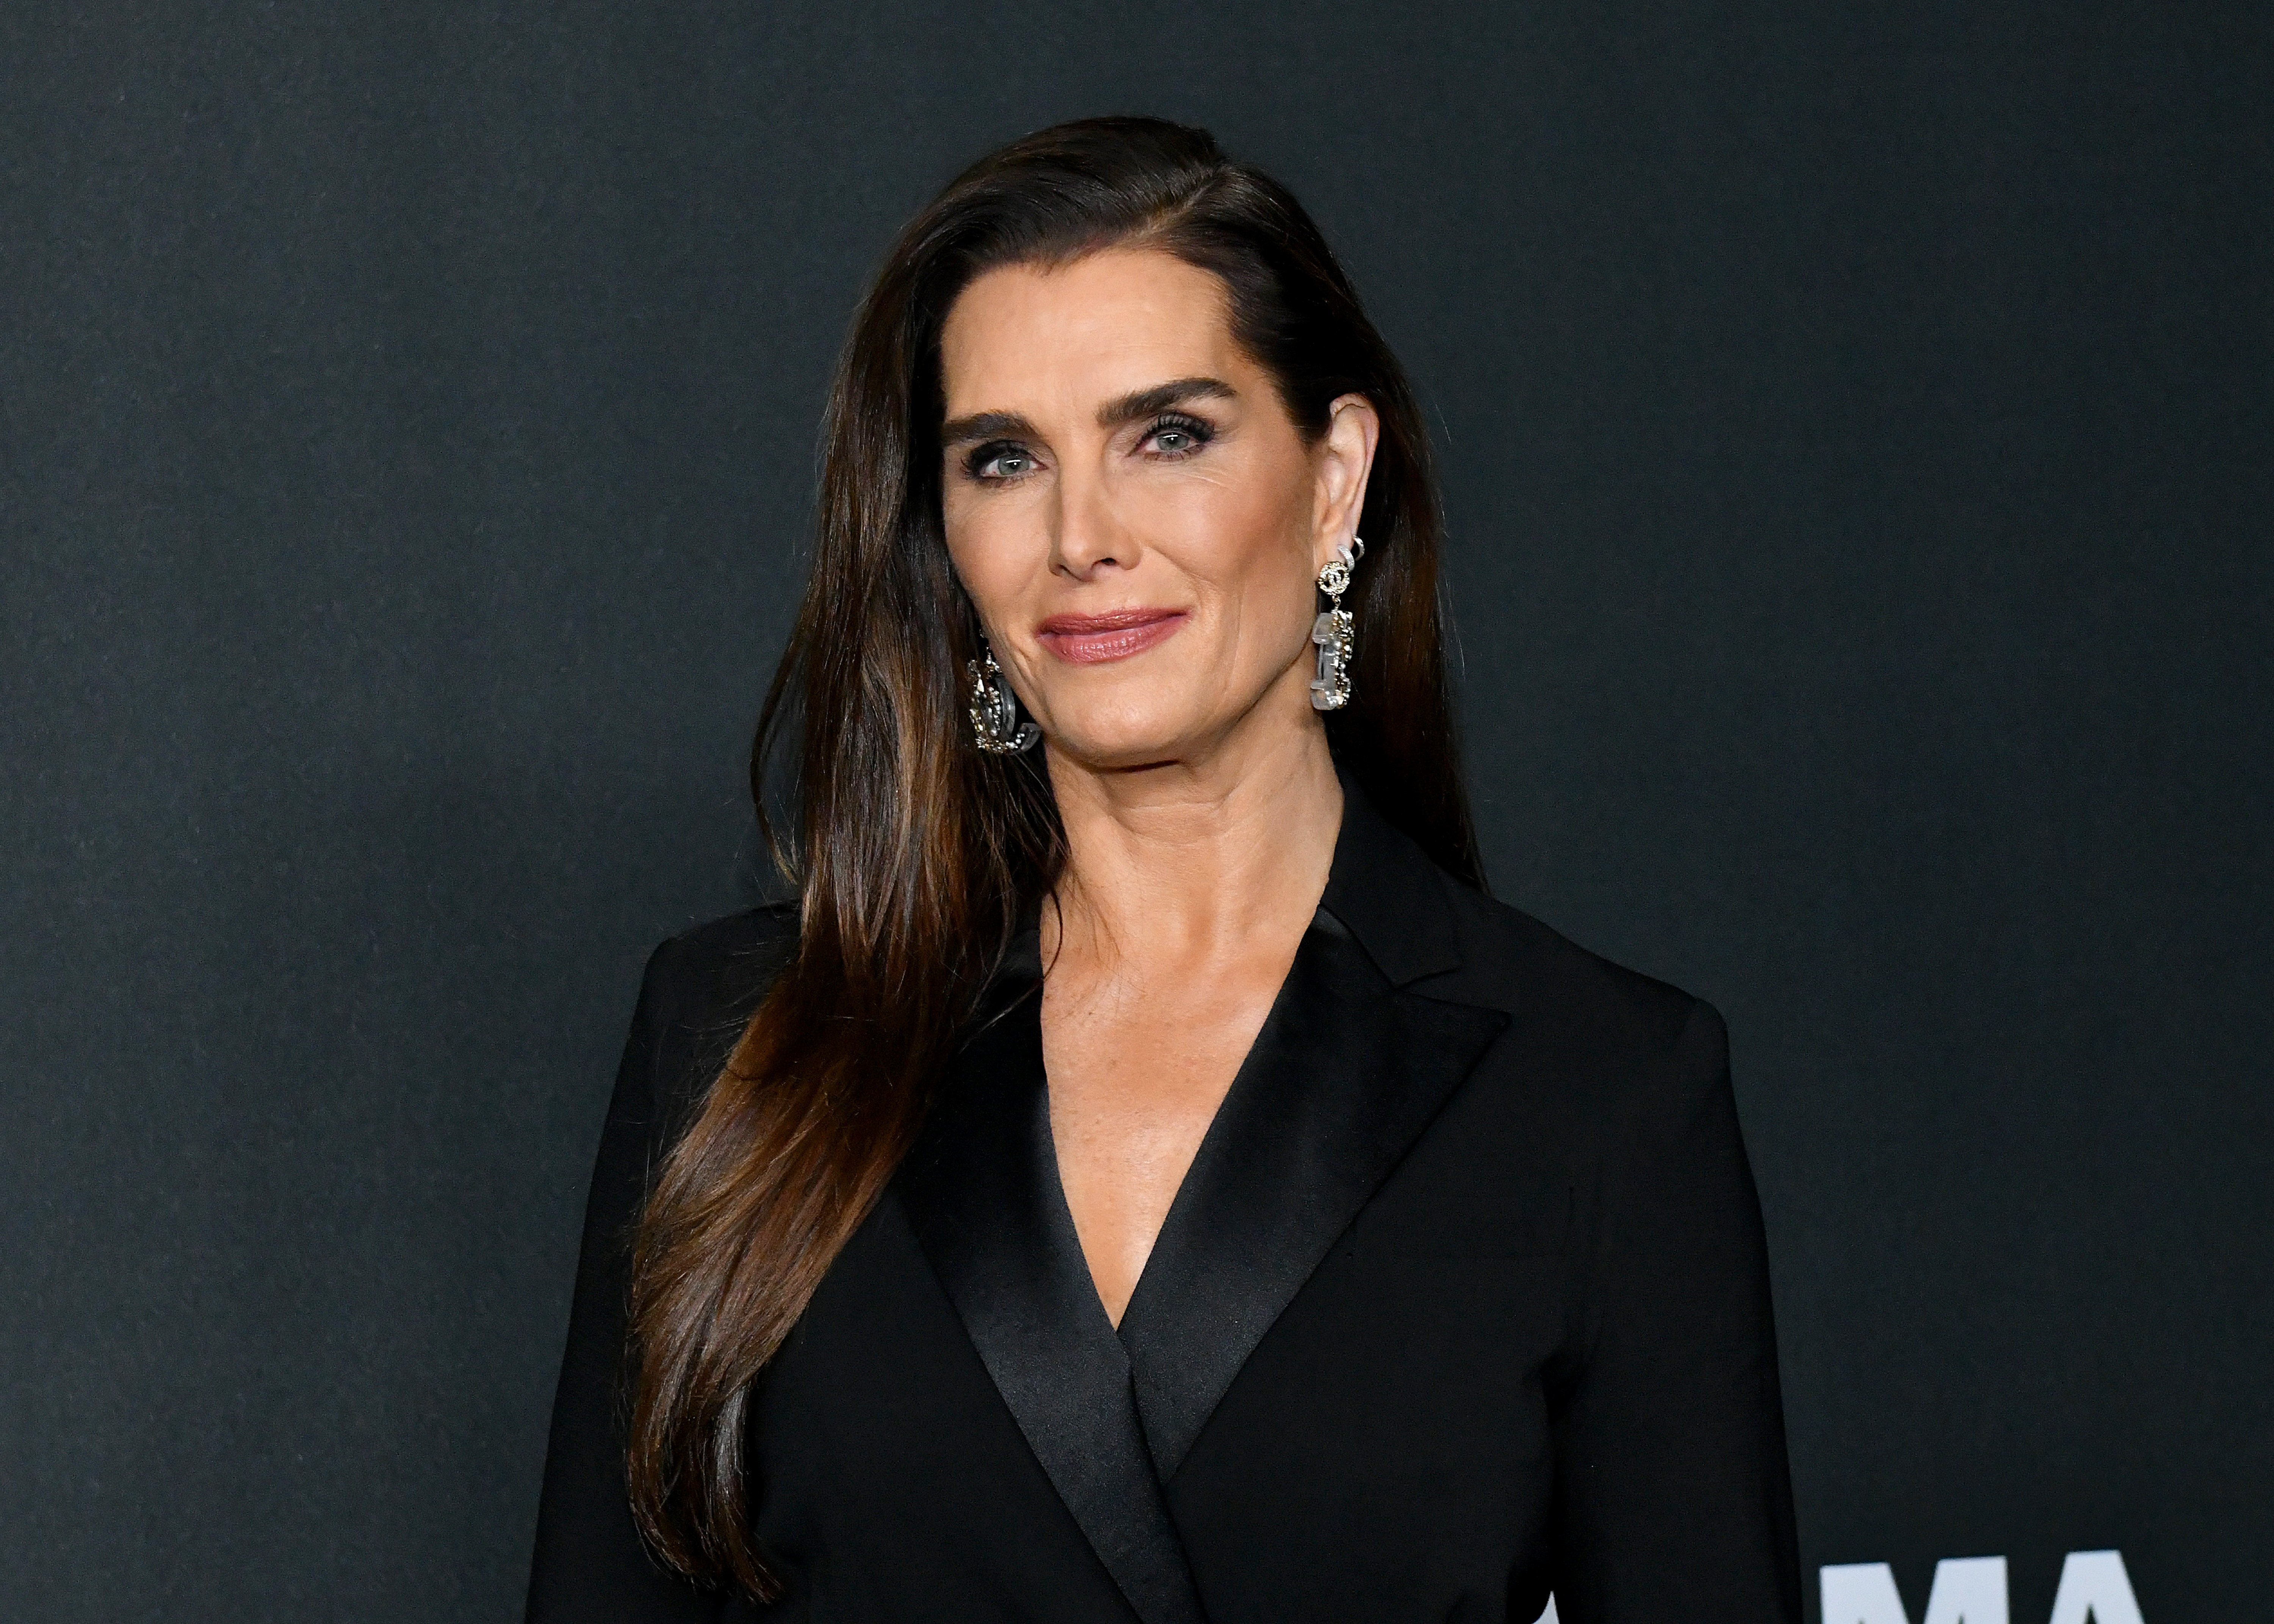 Brooke Shields attends MoMA's Twelfth Annual Film Benefit on November 12, 2019 in New York City | Photo: Getty Images